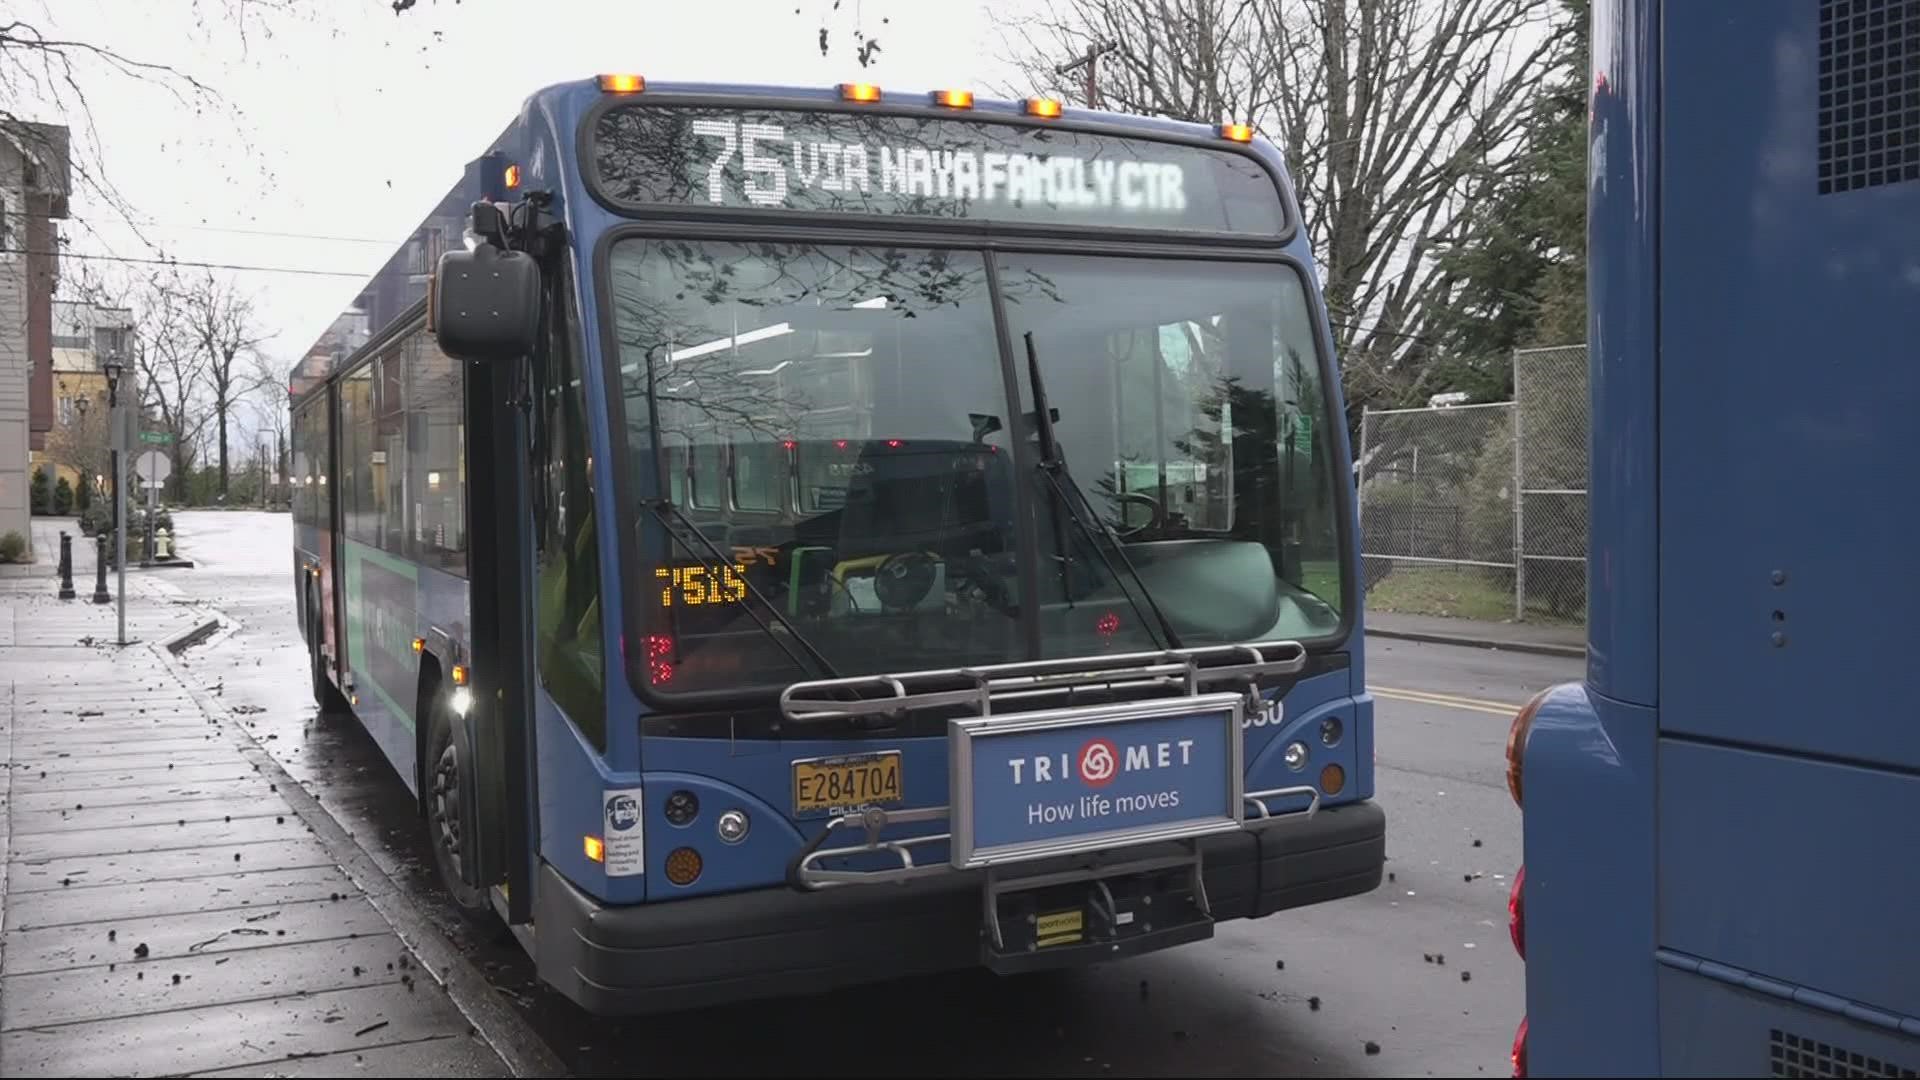 About a quarter of TriMet bus lines will experience some reduction in service starting Jan. 10. KGW traffic reporter Chris McGinness explains what riders can expect.